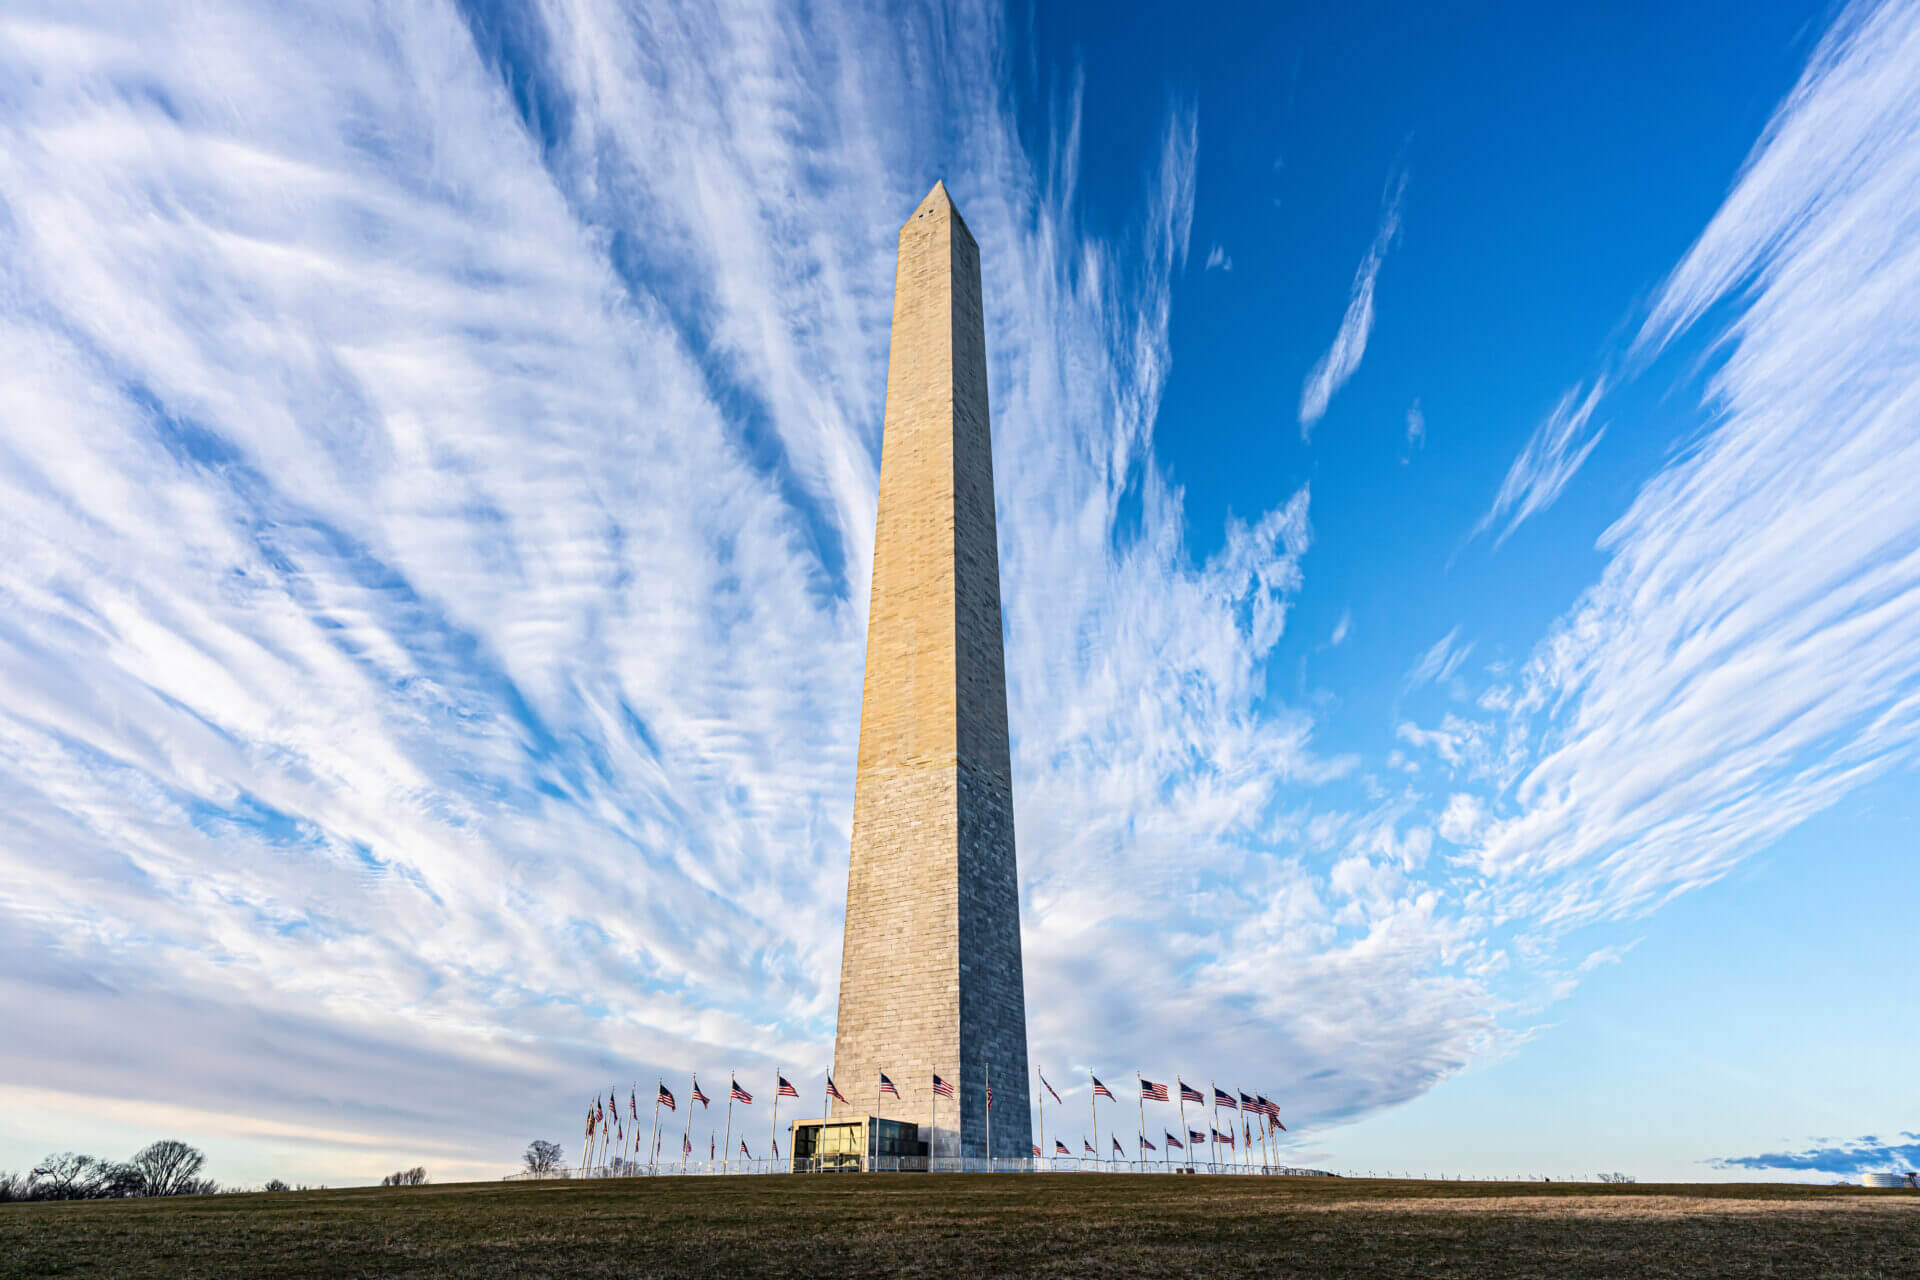 Washington Monument In Washington Dc With Blue Sky And Clouds